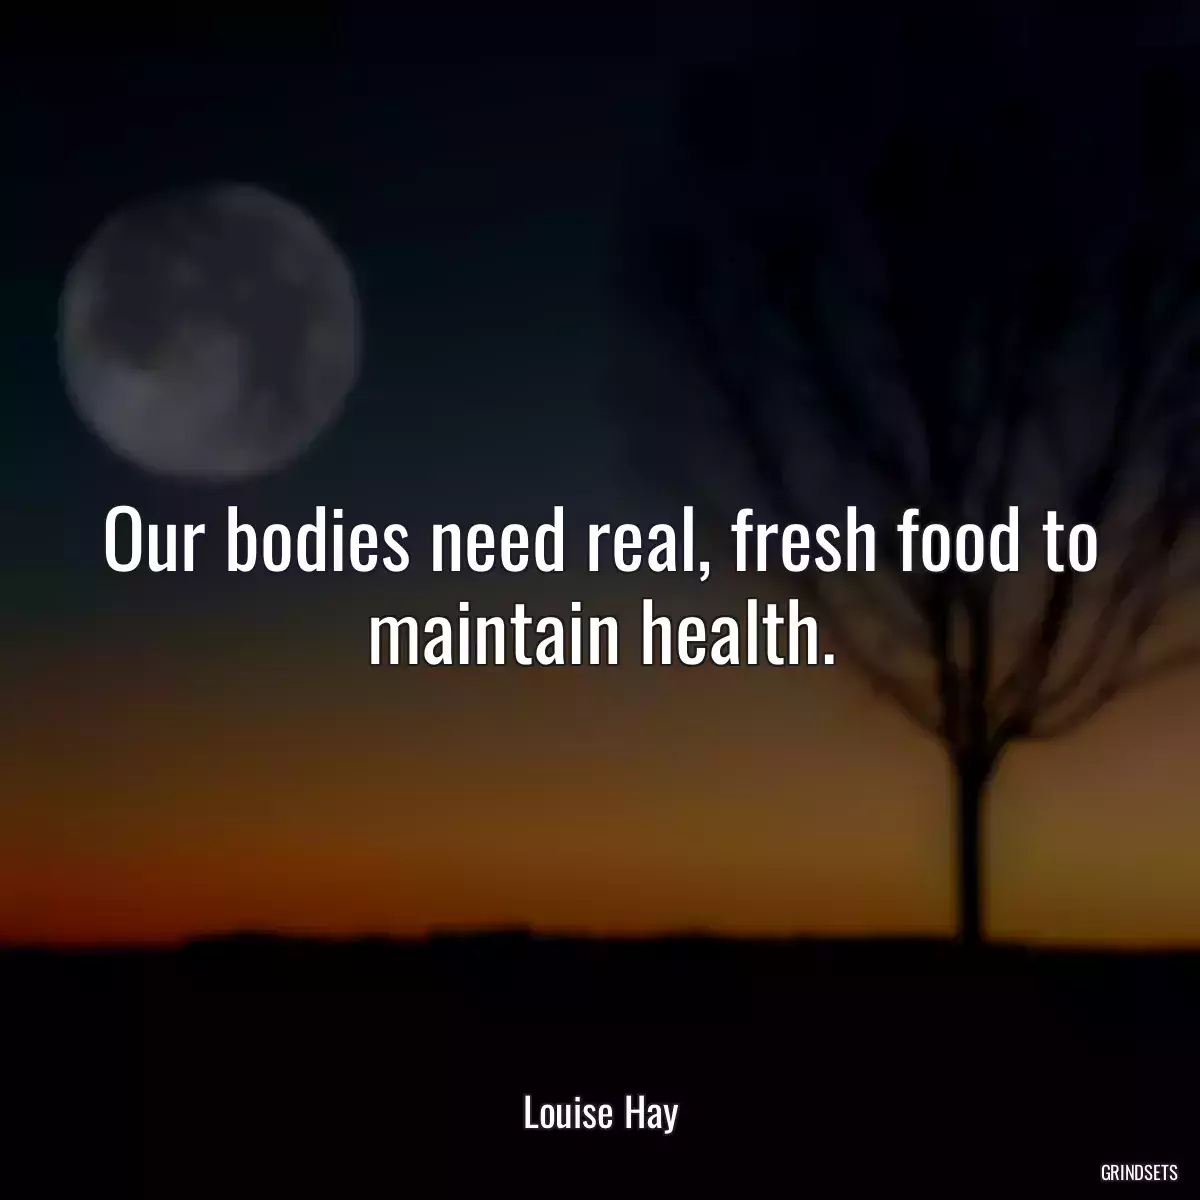 Our bodies need real, fresh food to maintain health.